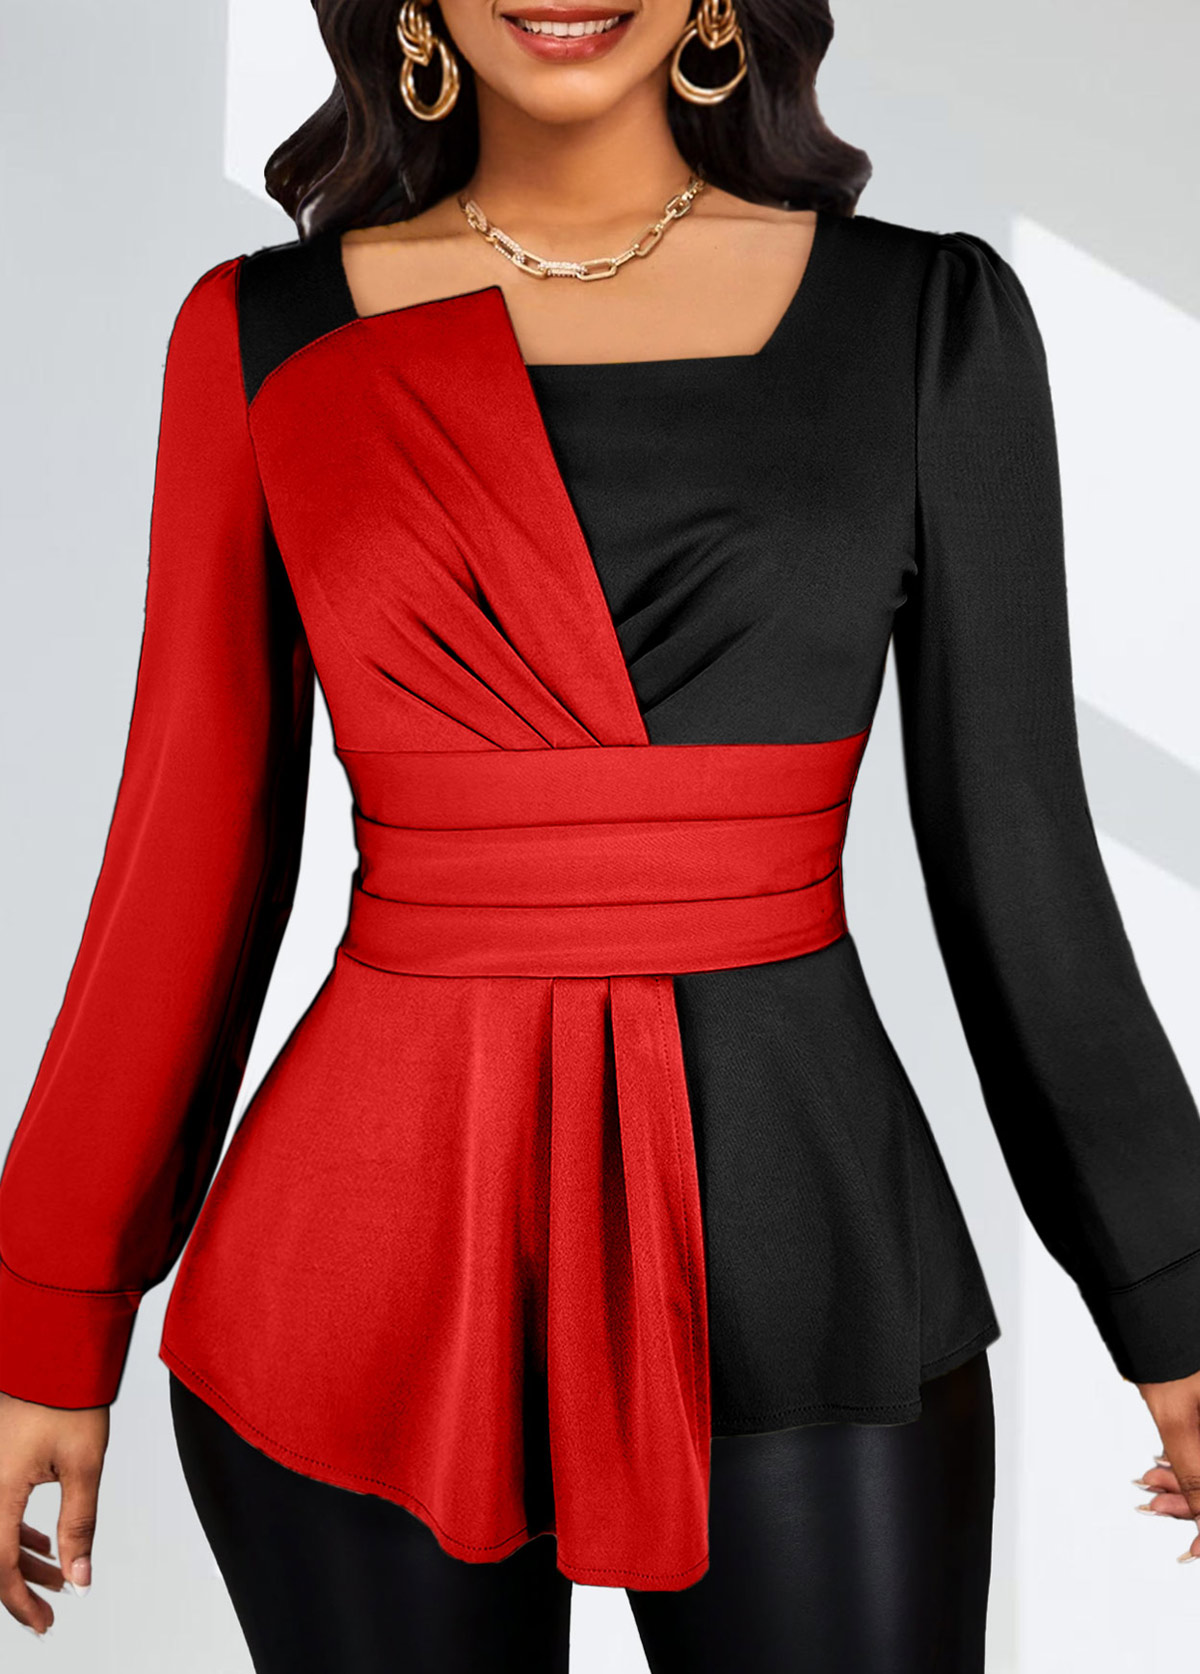 ROTITA Asymmetry Red Square Neck Long Sleeve Blouse